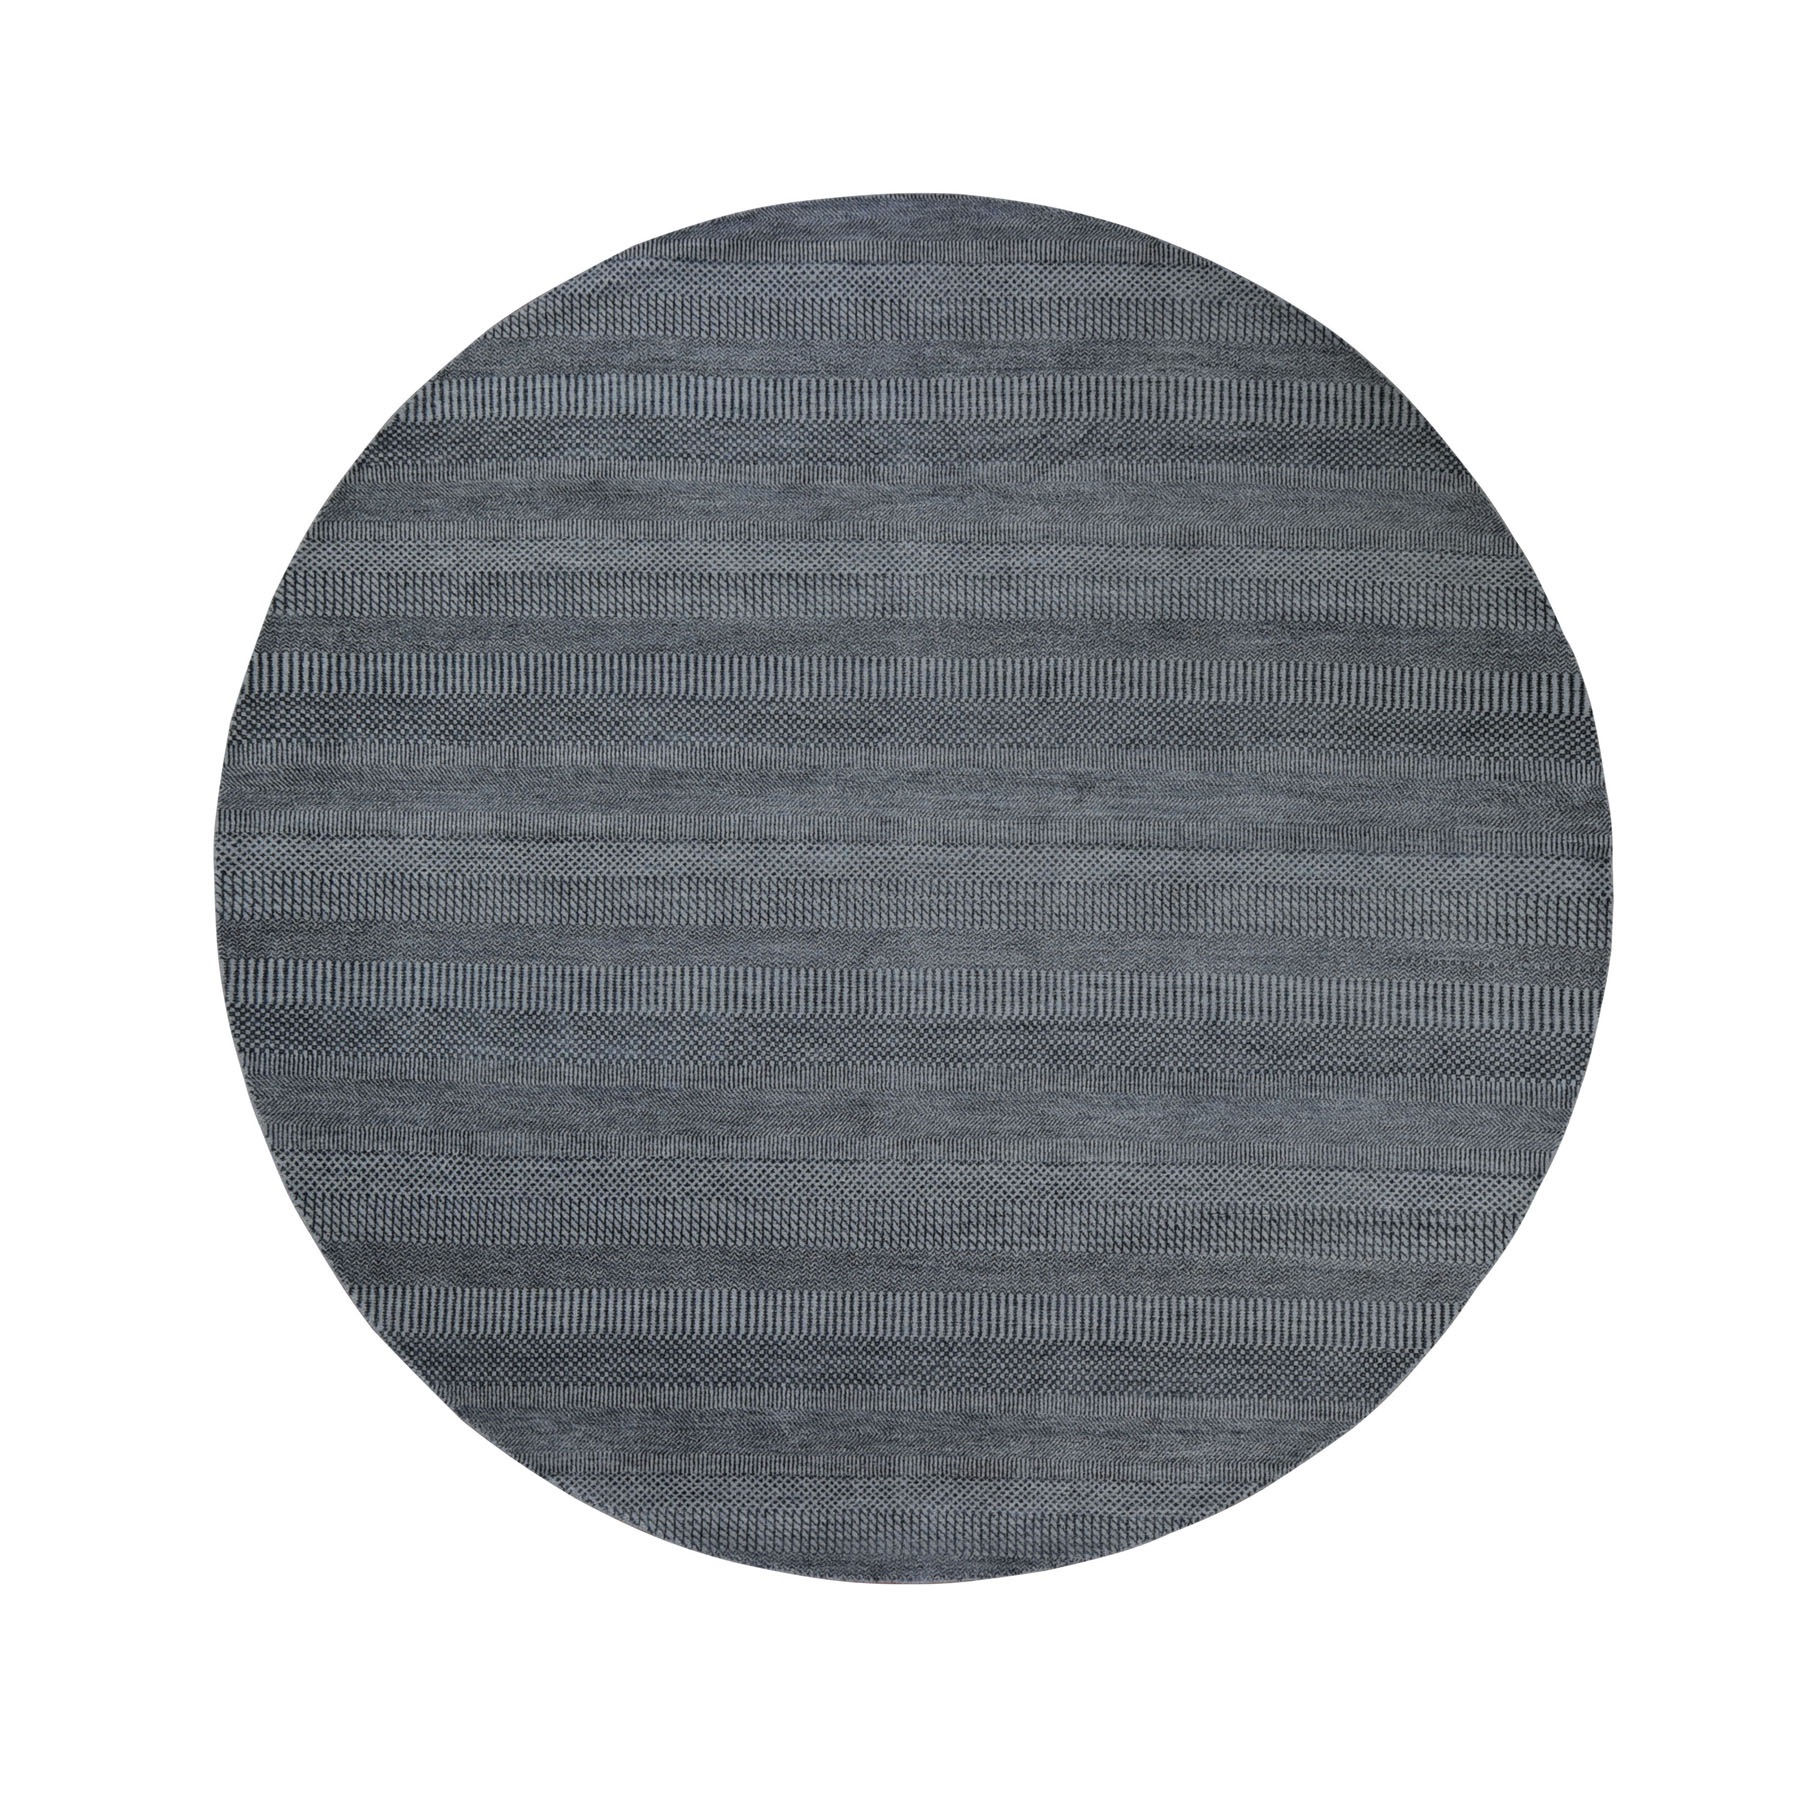 8-x8- Round Gray Grass Design Wool And Silk Hand Knotted Oriental Rug 